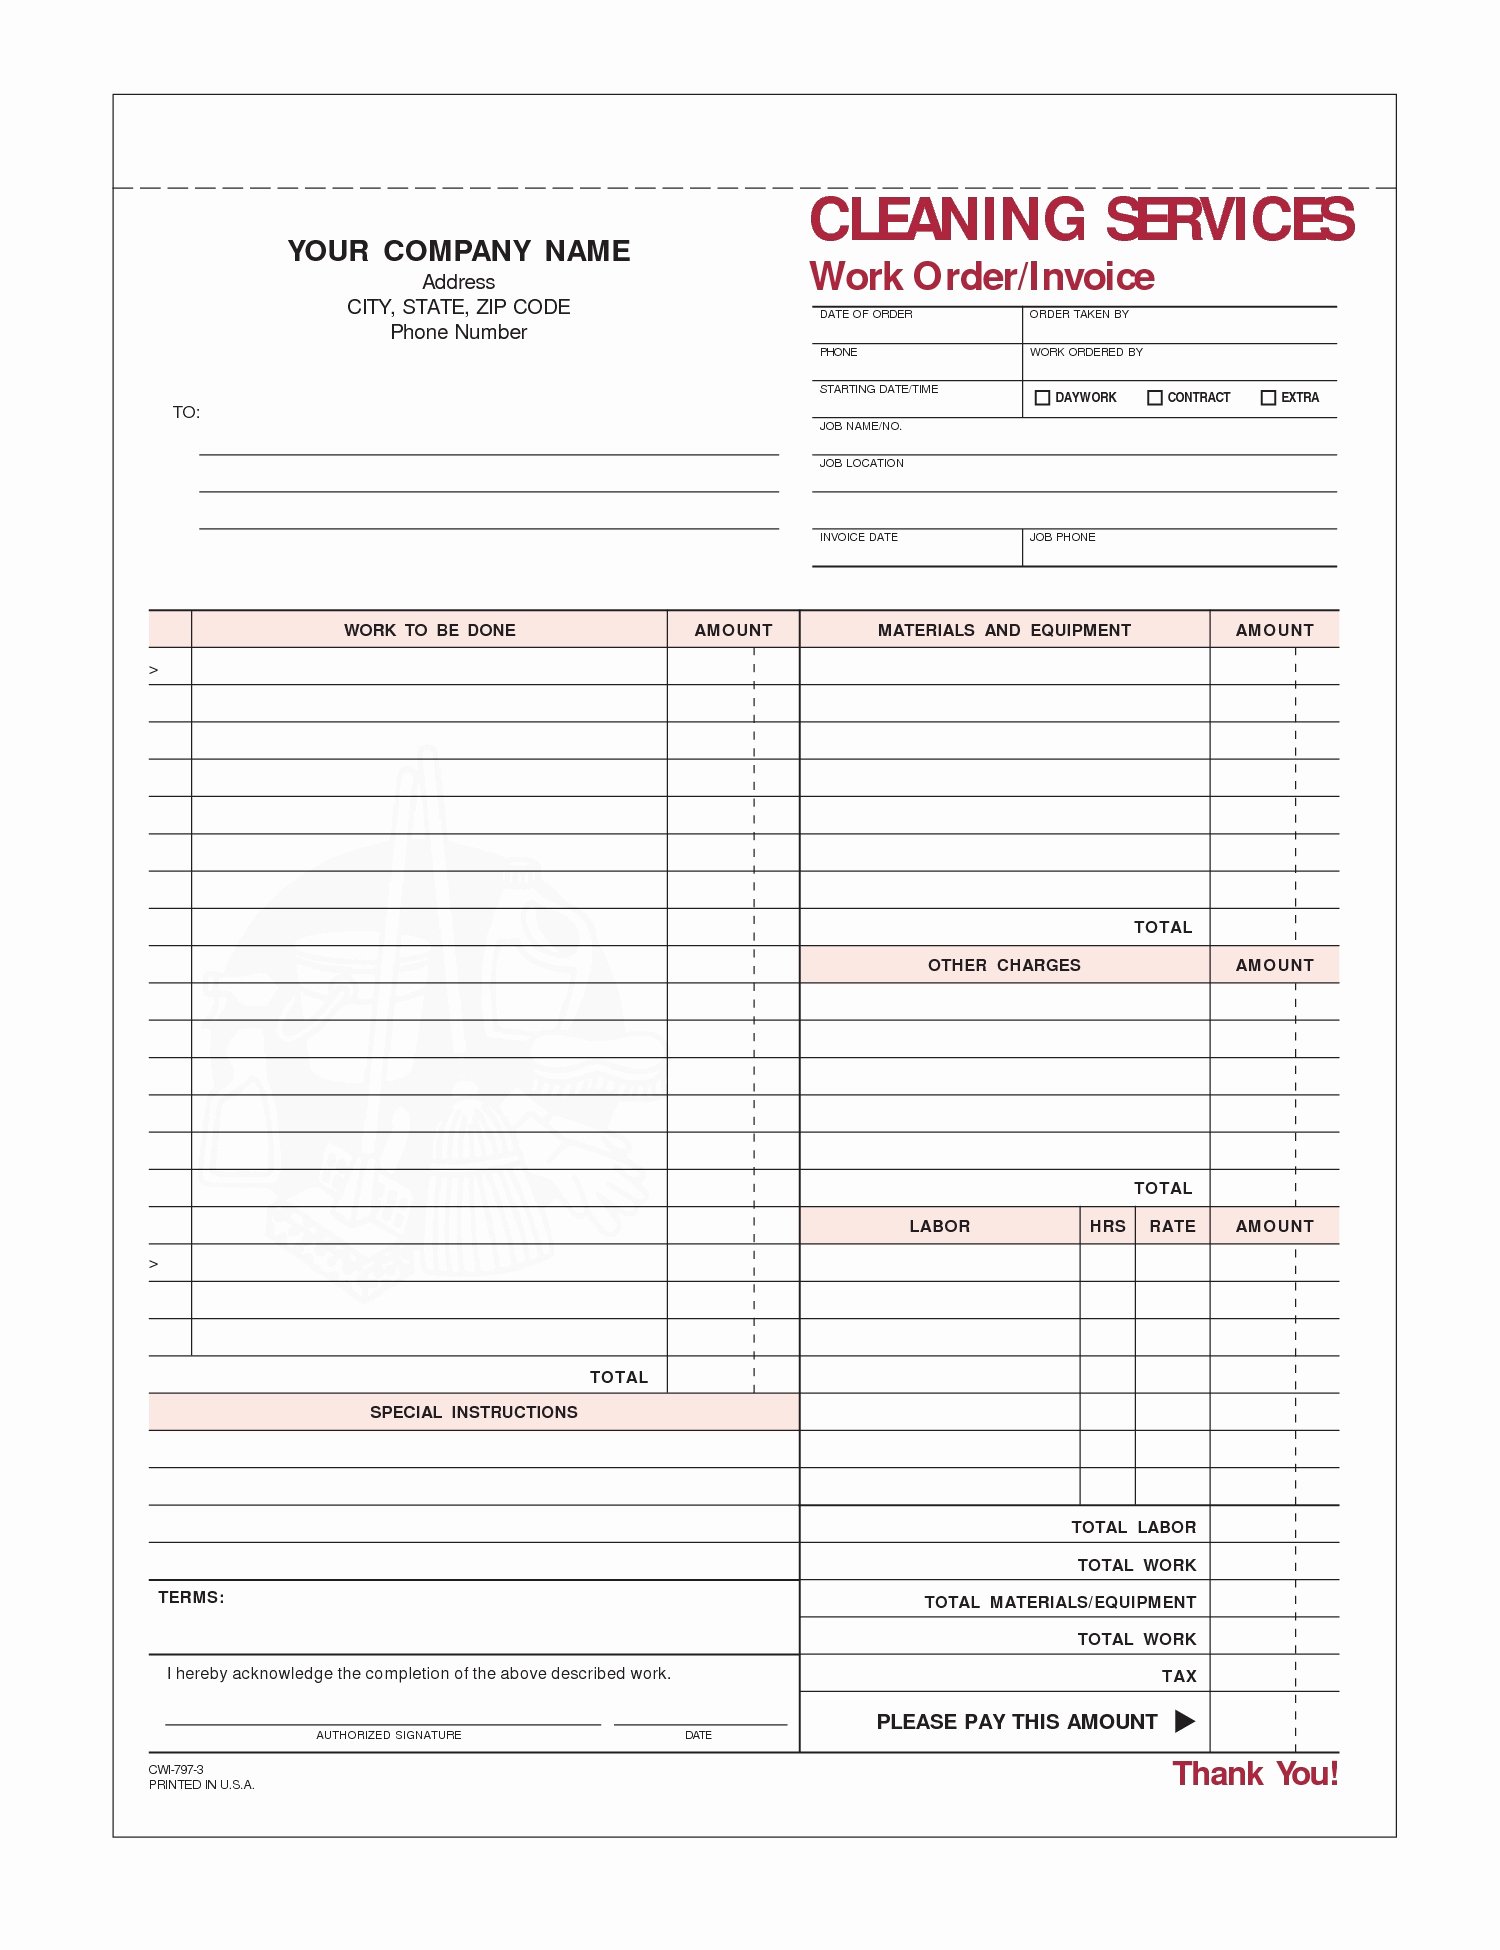 House Cleaning Invoice Template Elegant House Cleaning Invoice Template Invoice Template Ideas